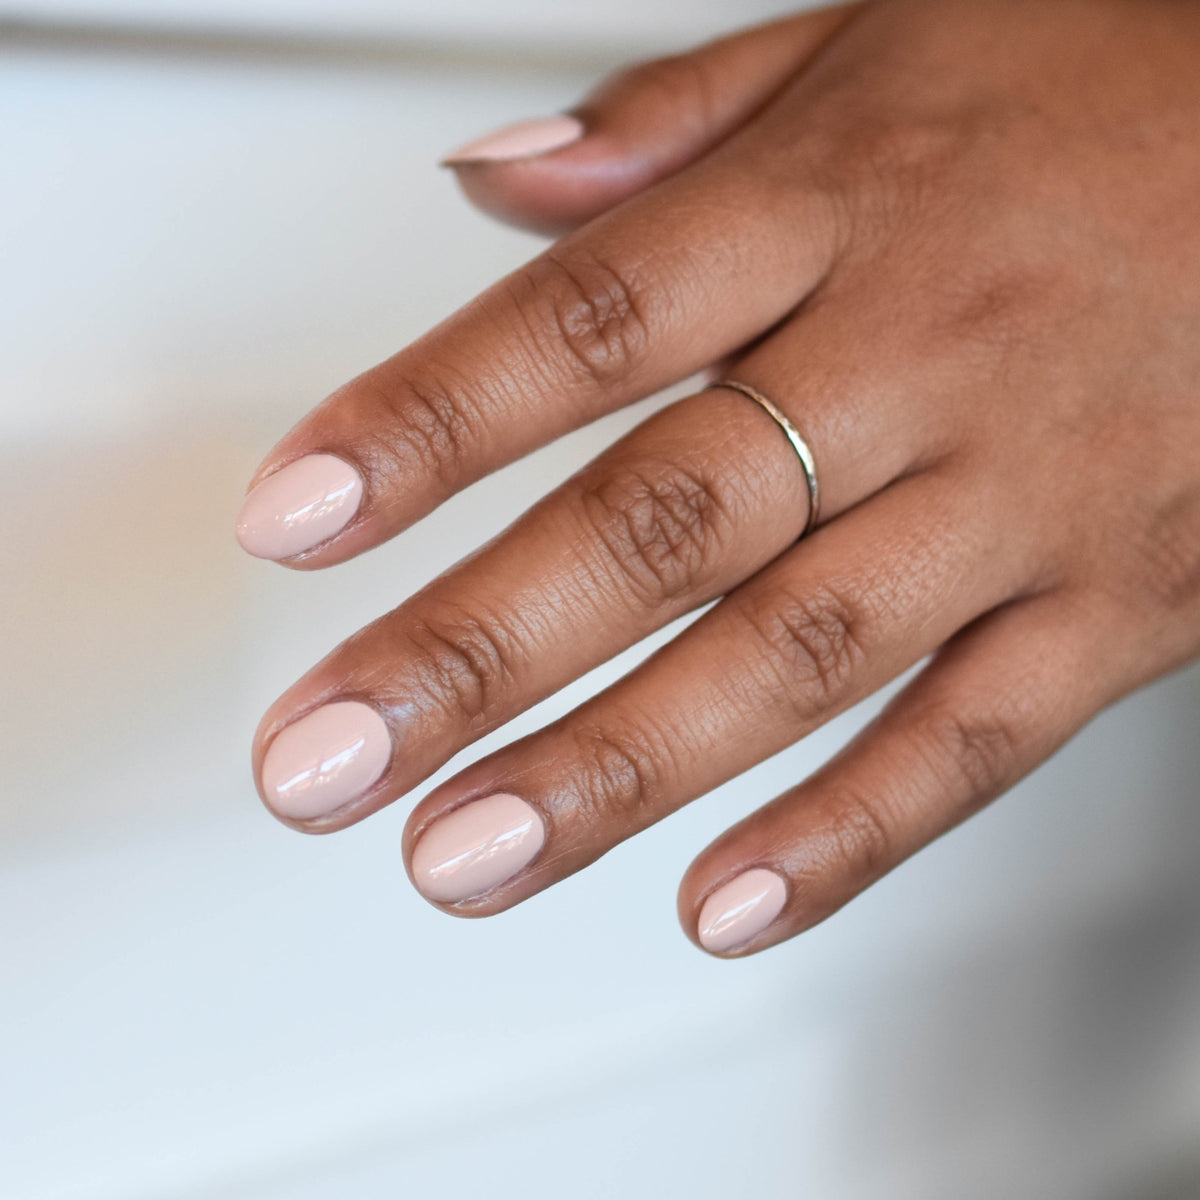 A Close up of a mid toned hand comes run from the upper right hand corner in front of a soft focus white background with soft shadows. The hand has a silver ring on one finger and is wearing Tweet Yo Self nail polish from Hello Birdie which is a beige neutral hue.